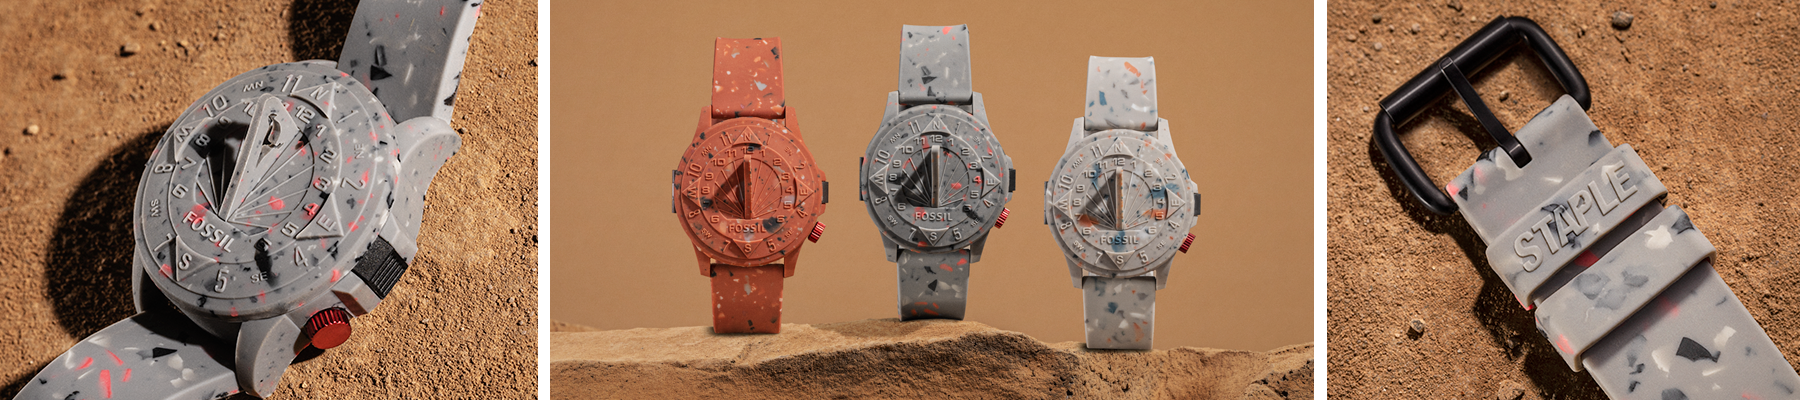 3 feature photos of sundial watches from Jeff Staple